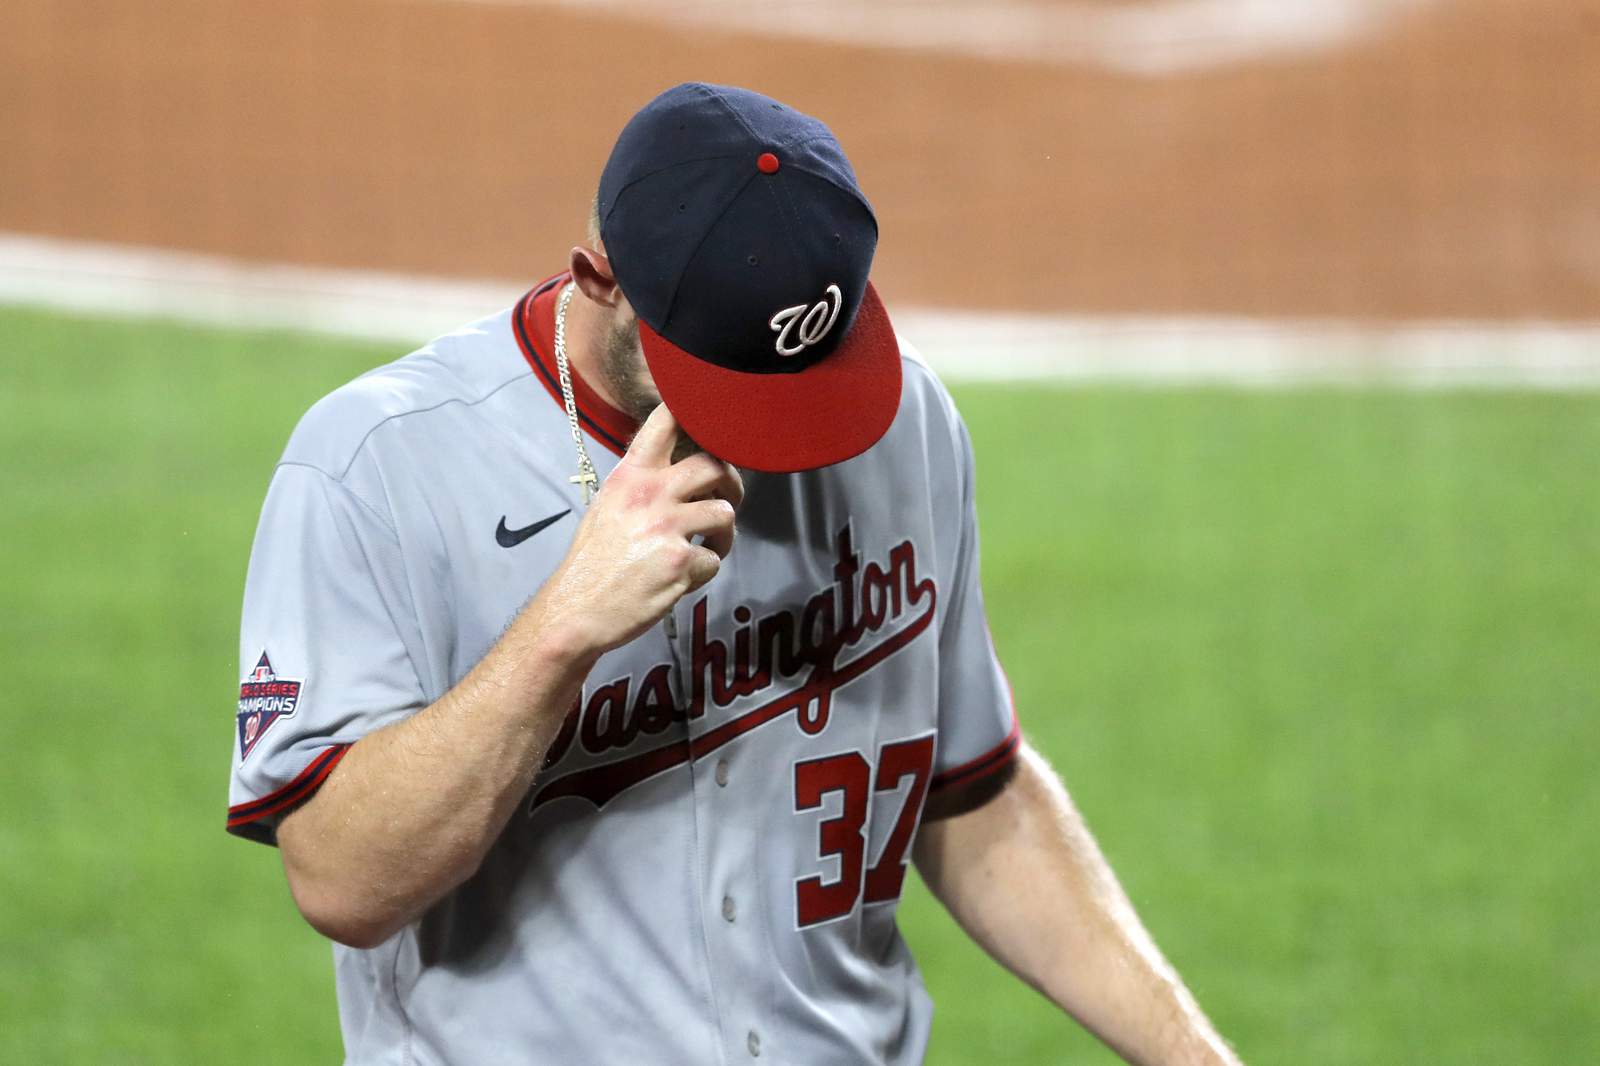 World Series MVP Strasburg on IL with nerve issue in hand